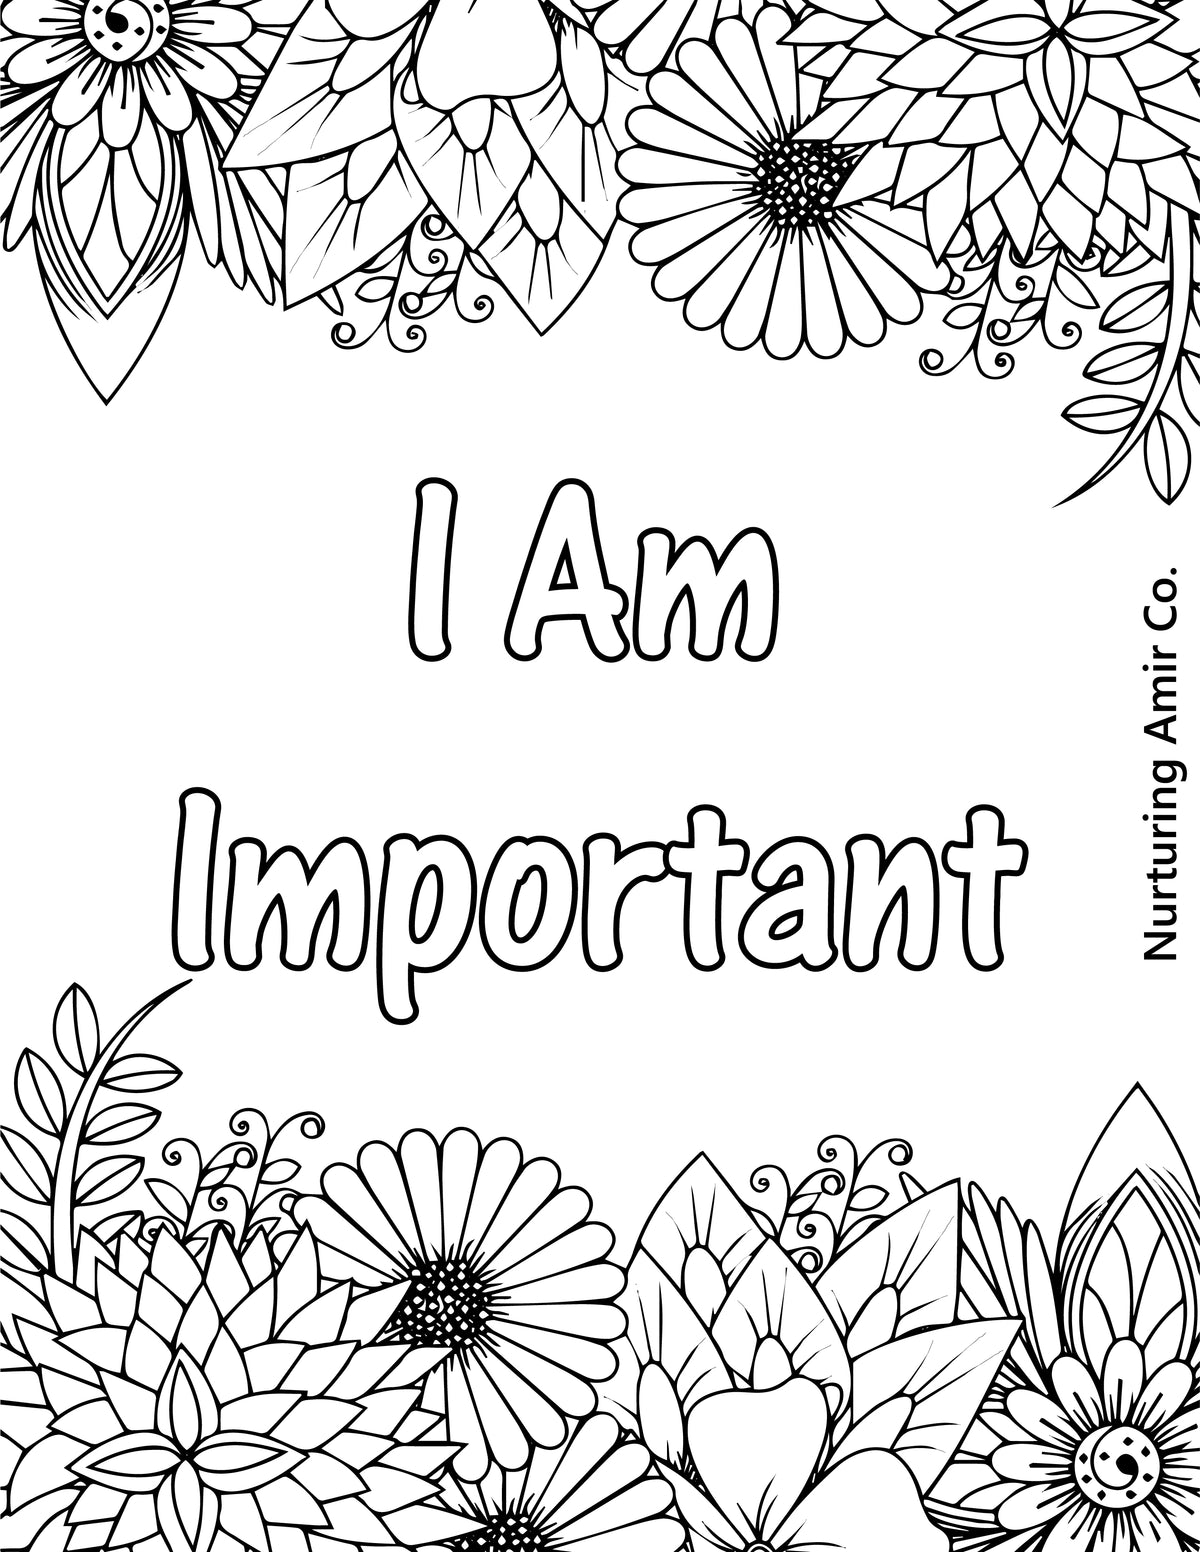 Affirmation Coloring Pages